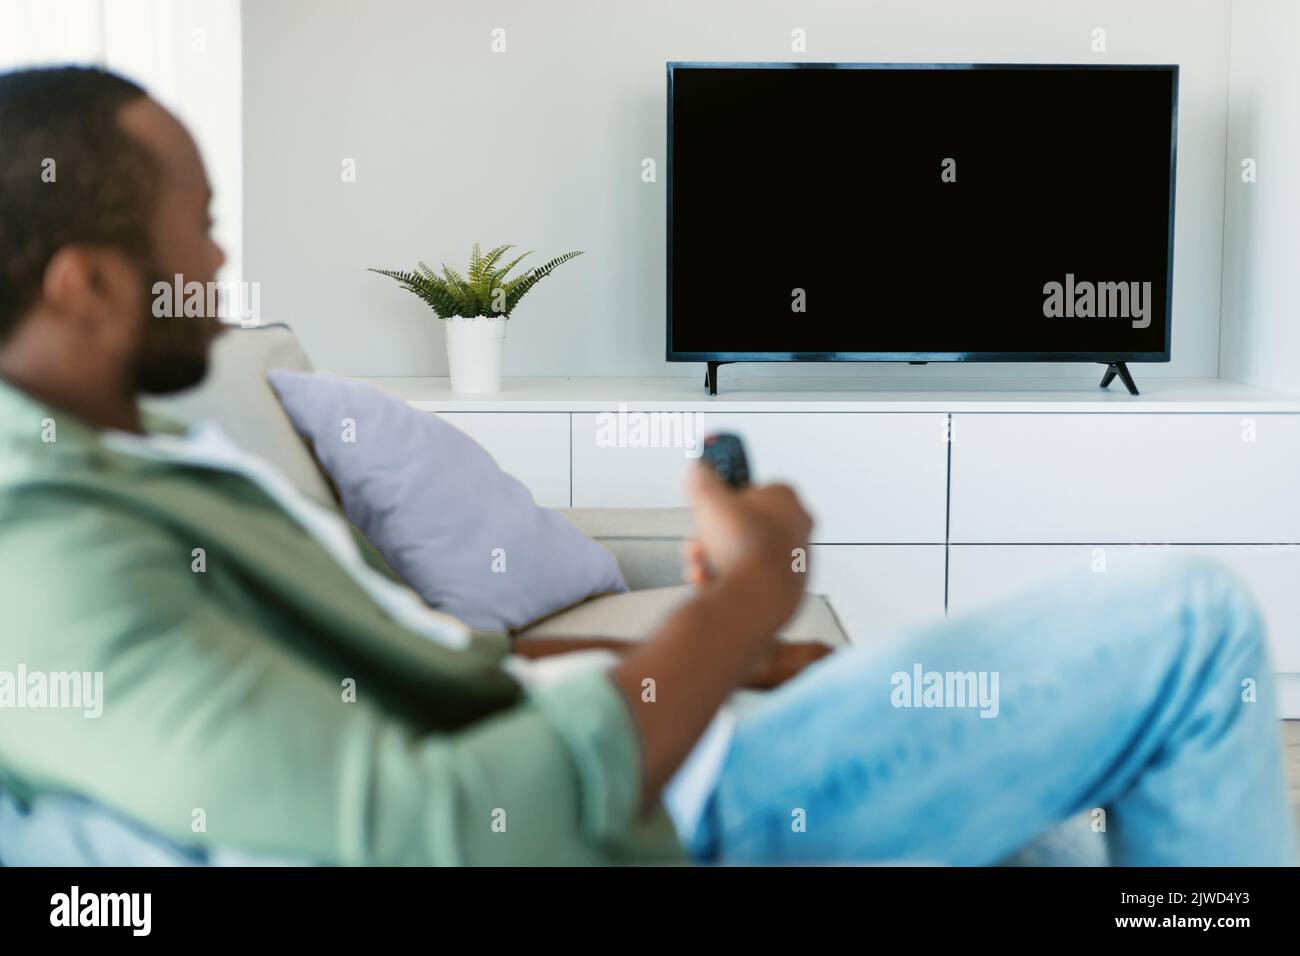 Relaxed black guy watching TV holding remote control and switching channels on plasma television set with blank screen Stock Photo